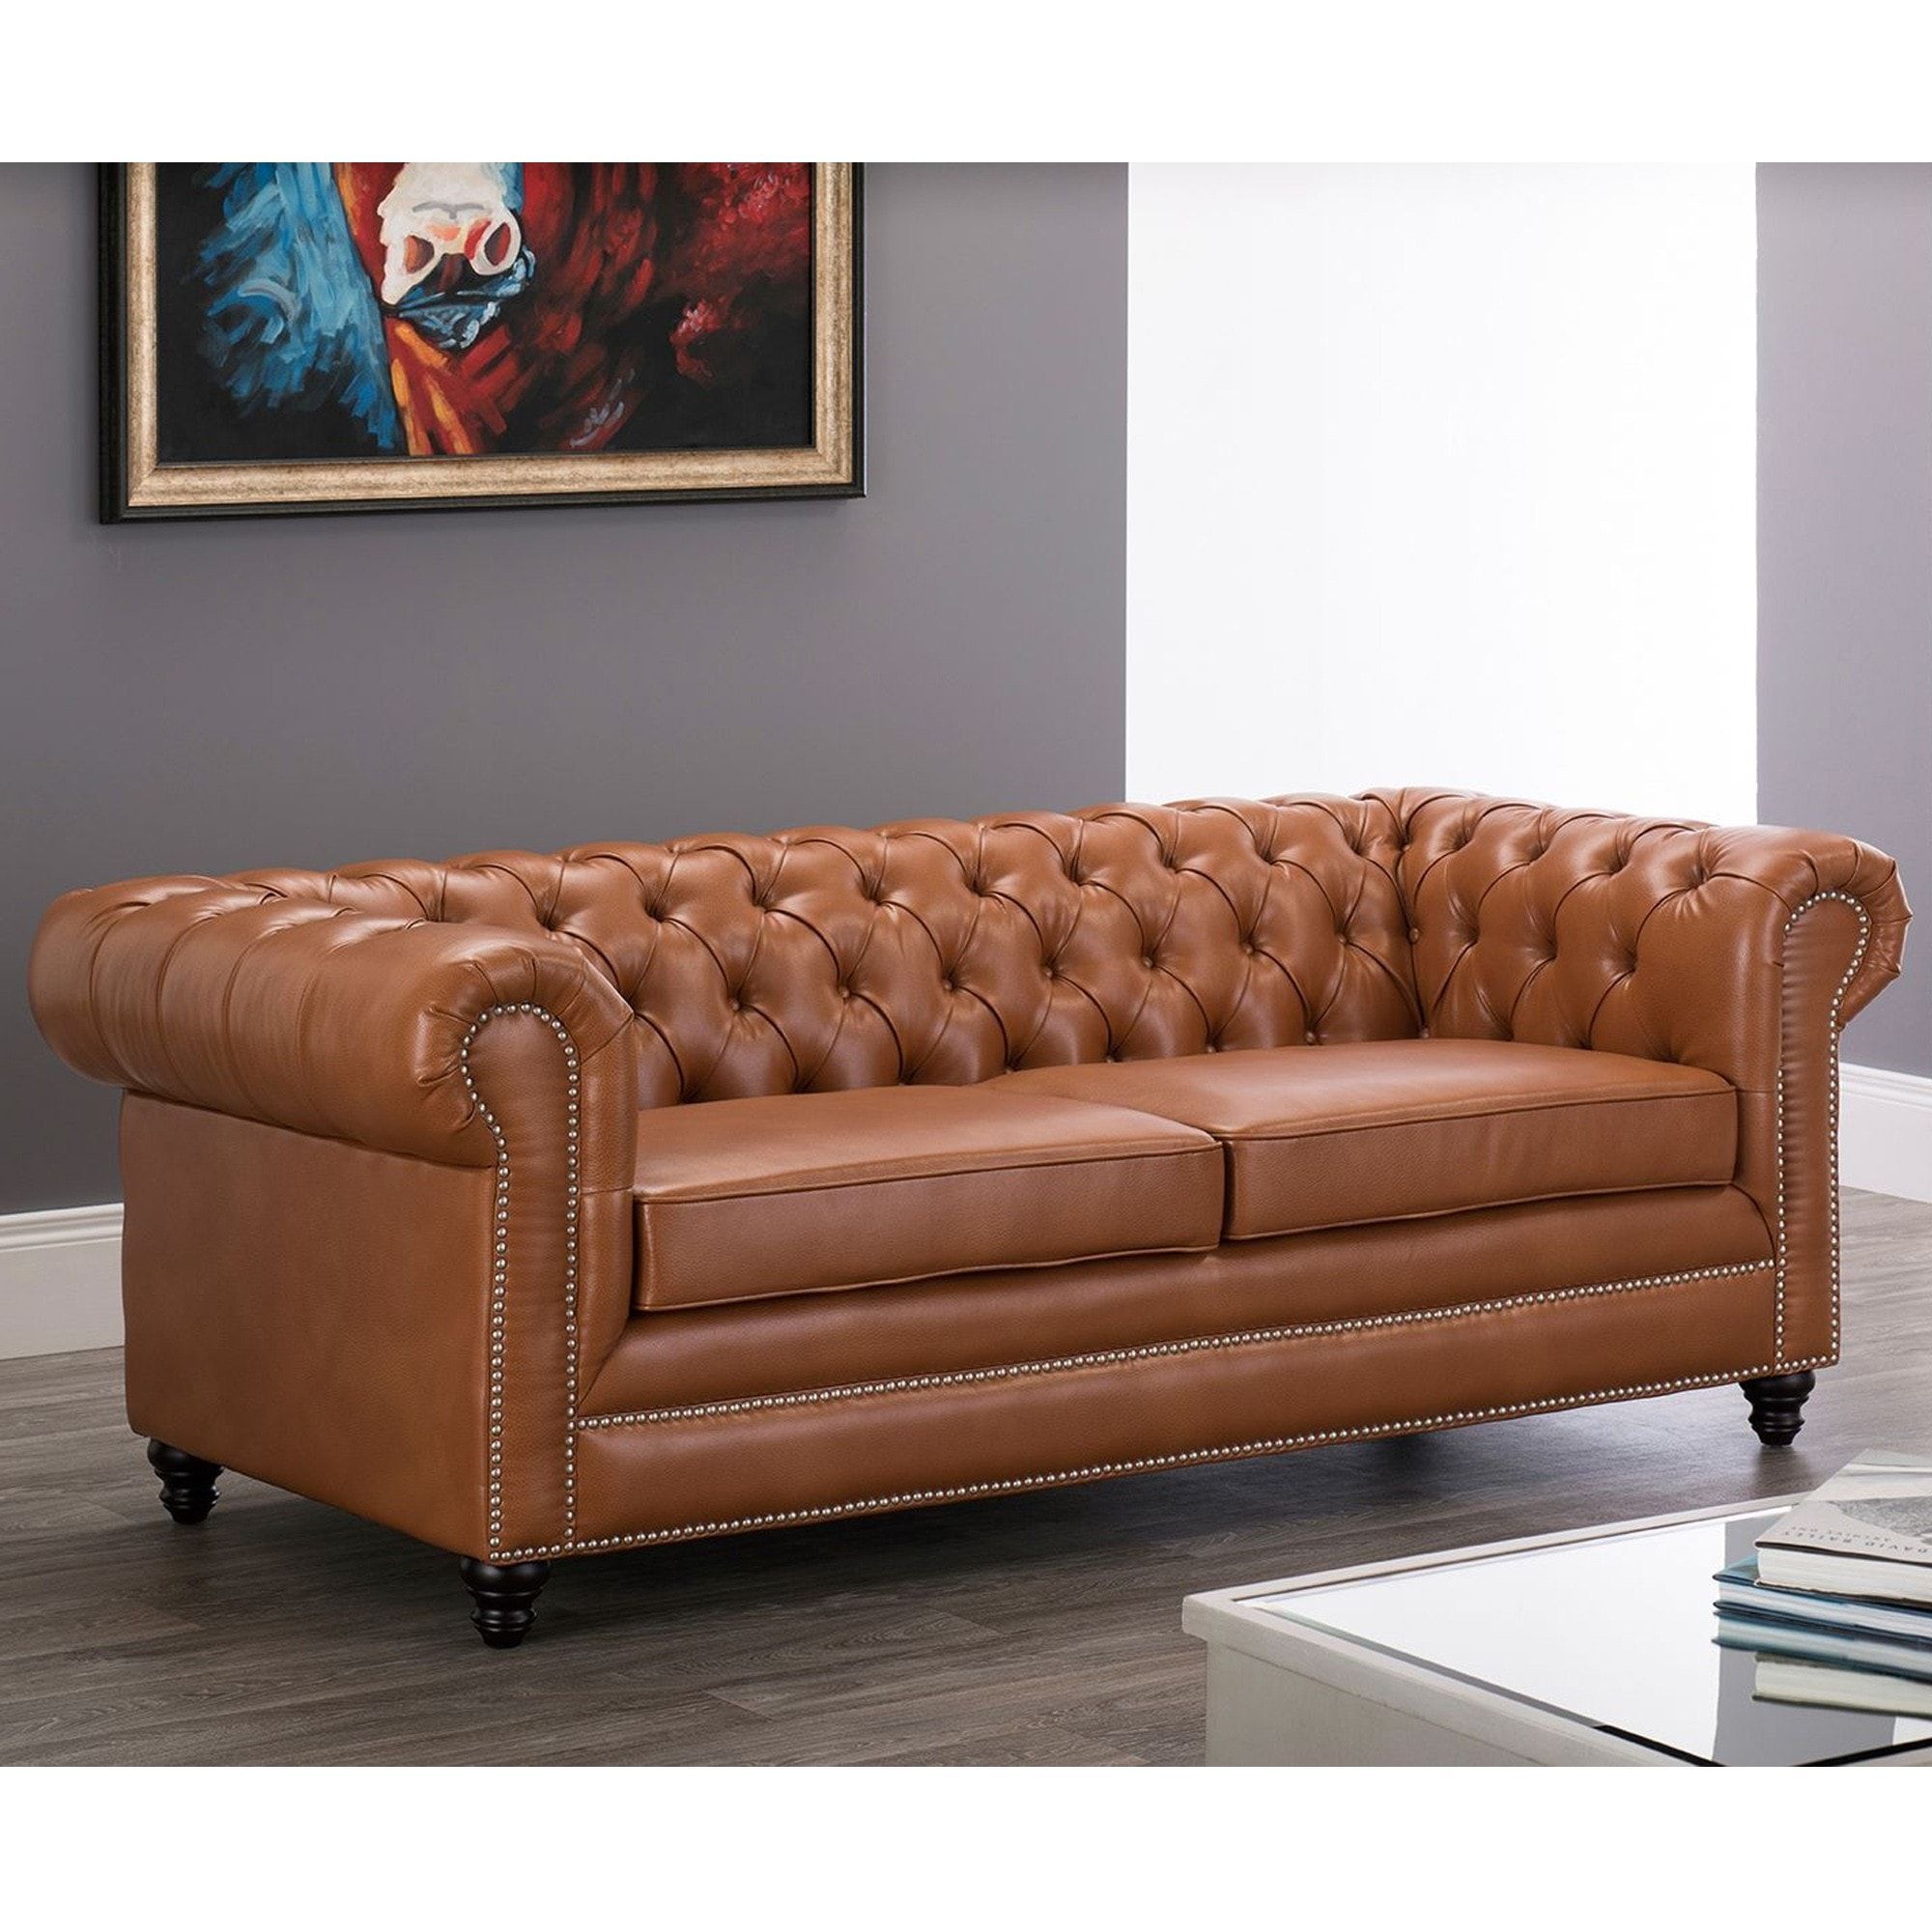 Faux Leather Chesterfield 3 Seater Sofa Tan | Tan Chesterfield Sofa For Traditional 3 Seater Faux Leather Sofas (Gallery 2 of 20)